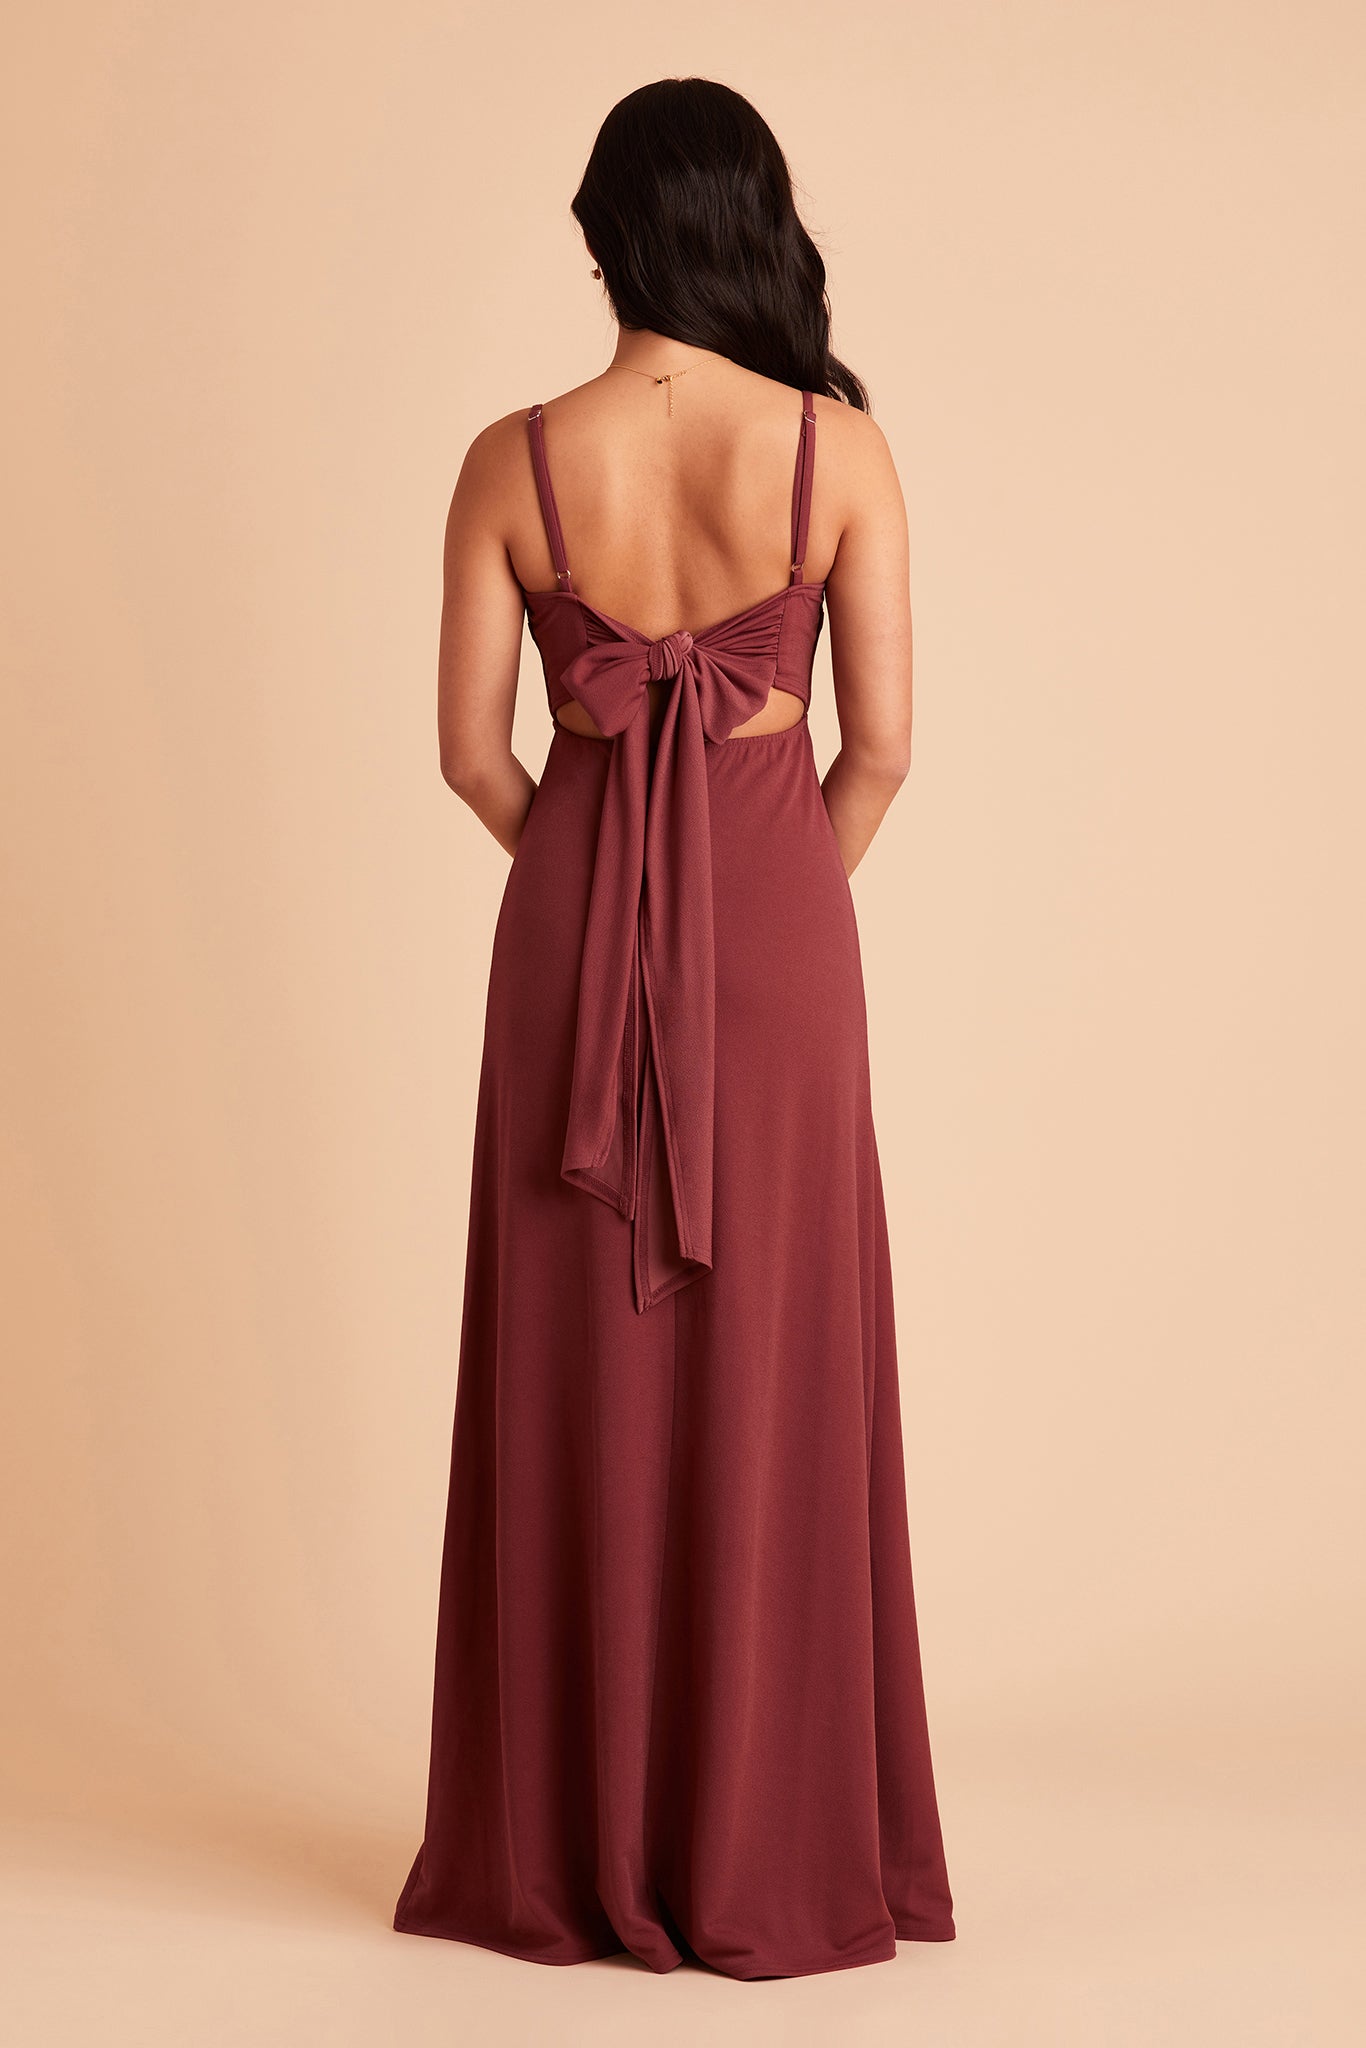 Benny bridesmaid dress in rosewood crepe by Birdy Grey, back view